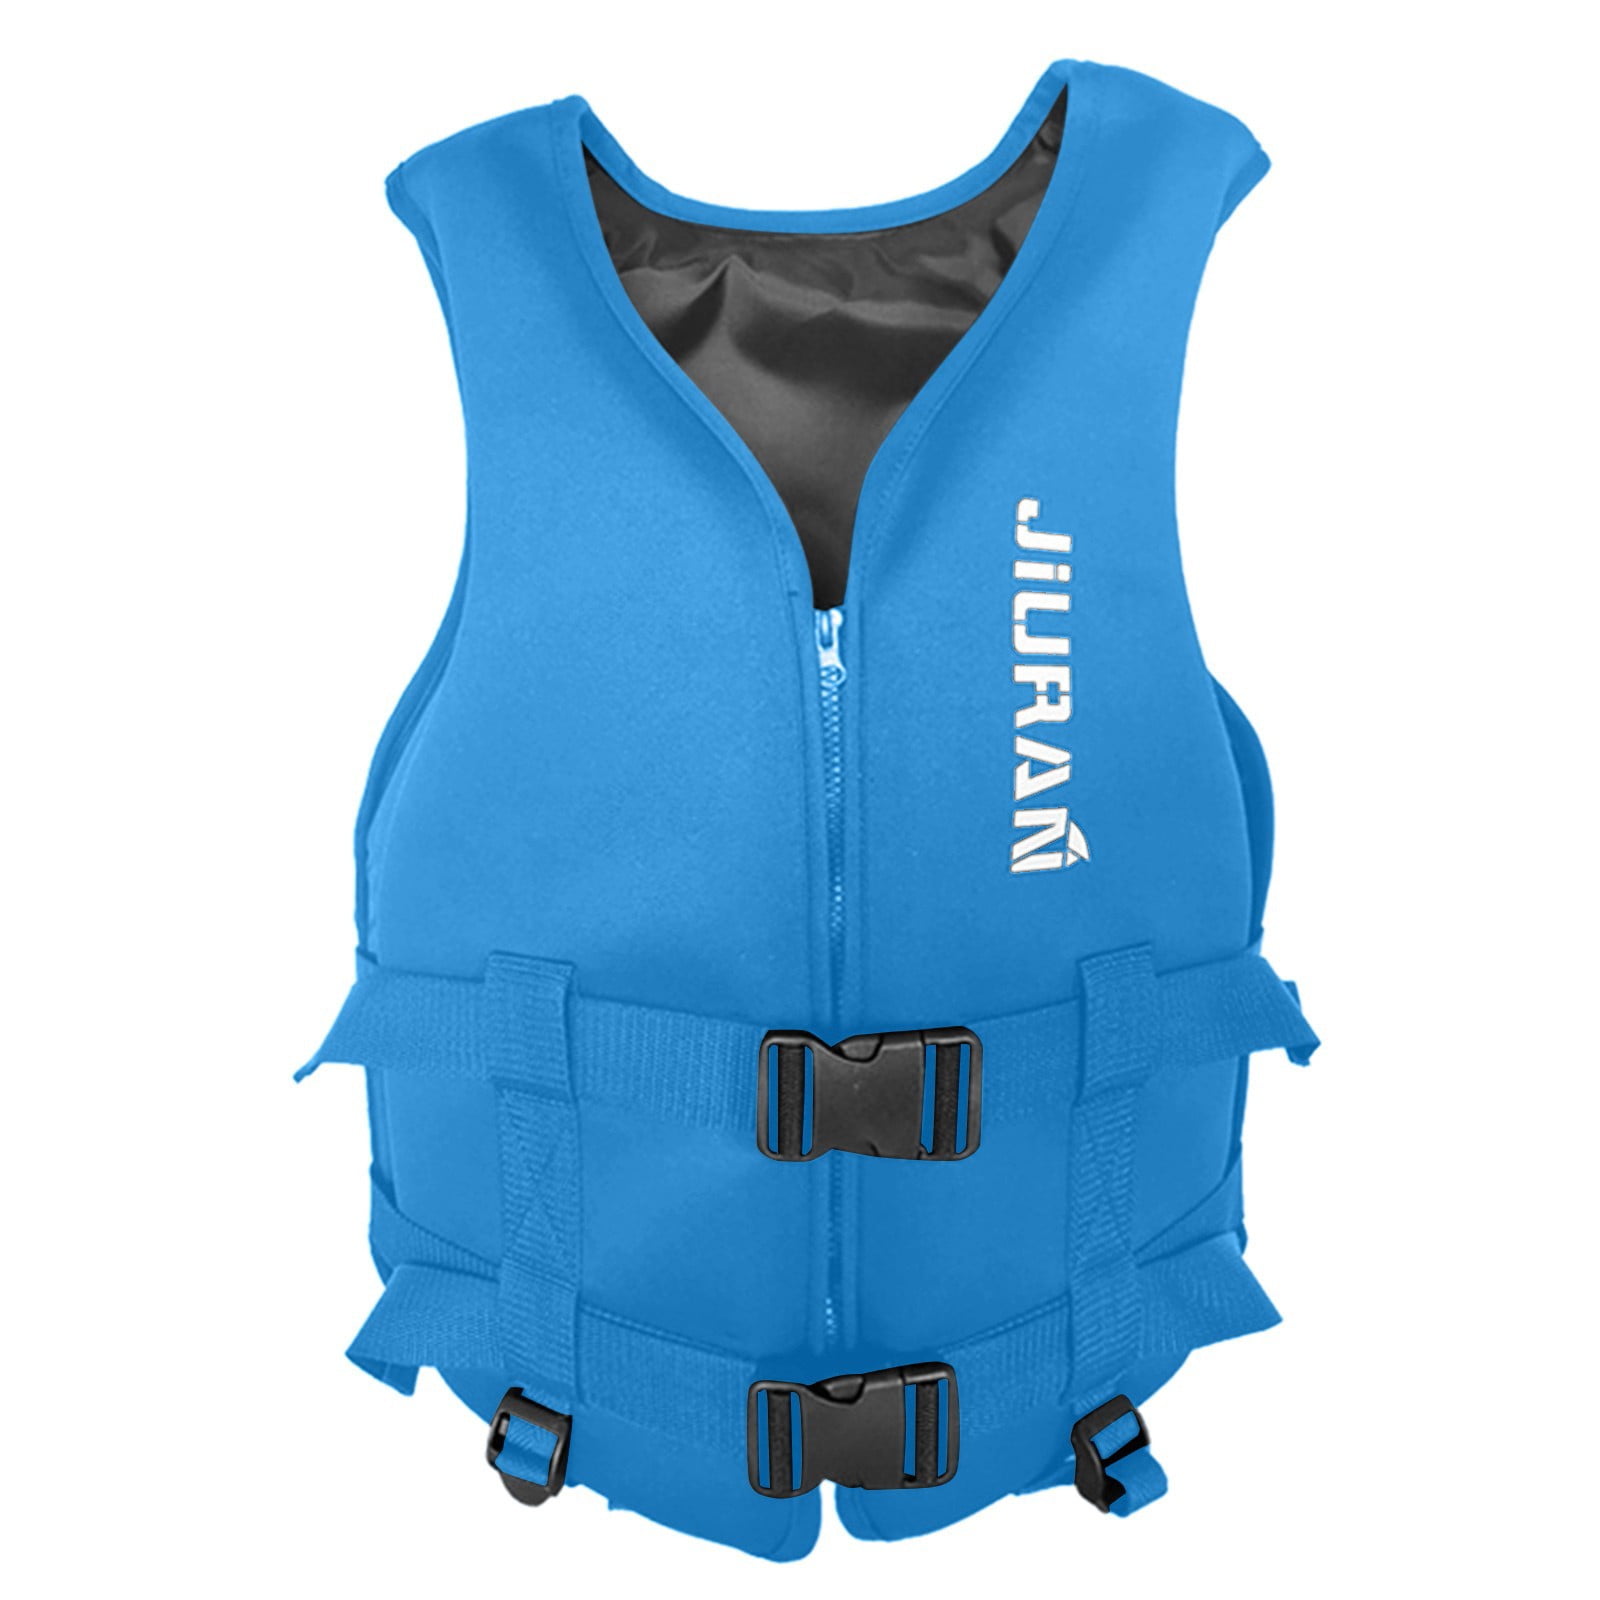 Adults Summer Swimming Floating Buoyancy Aid Foam Vest Life Jacket Rescue Suit 